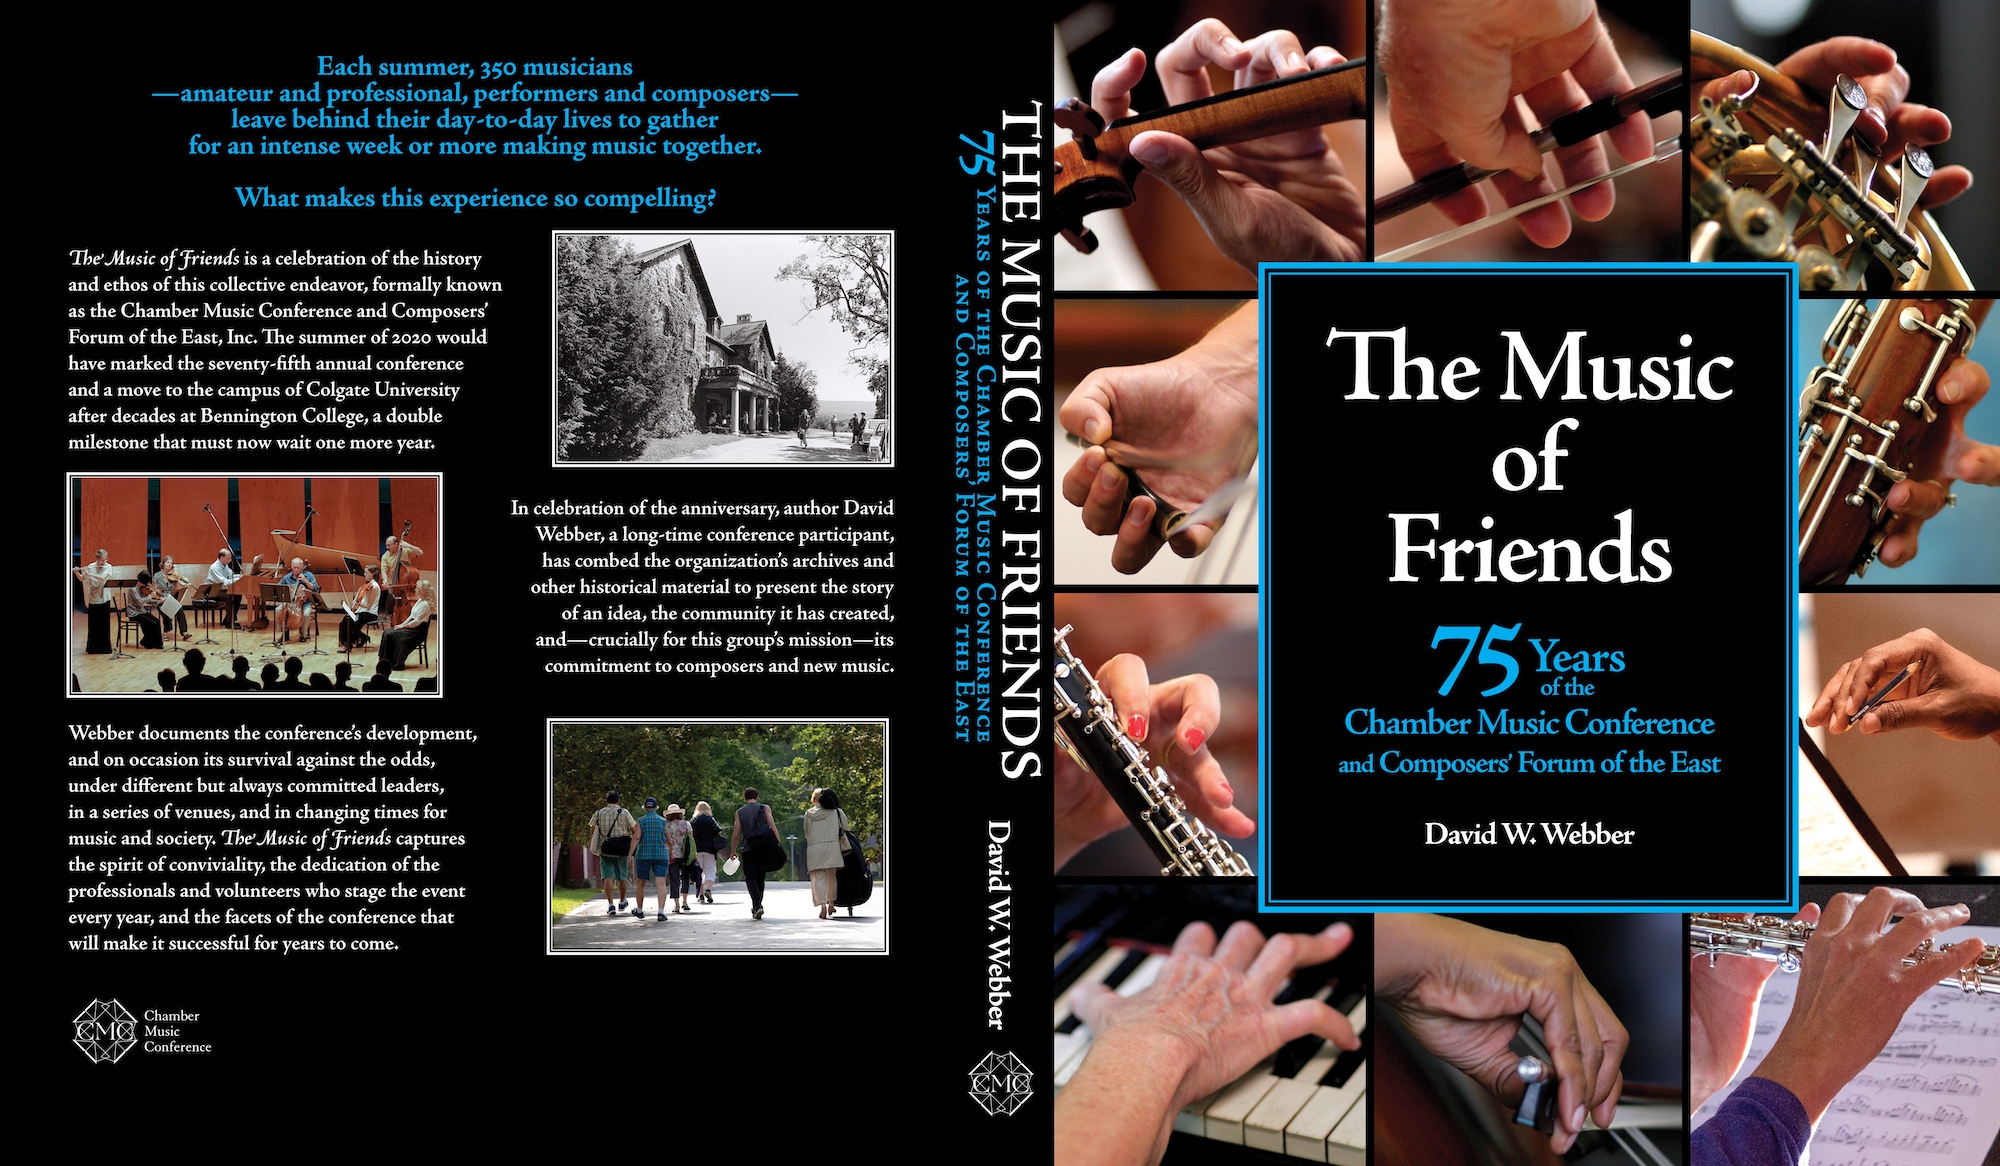 Front cover featuring the title The Music of Friends, with 10 photos arranged around the perimeter, each photo a close-up on a hand holding a musical instrument